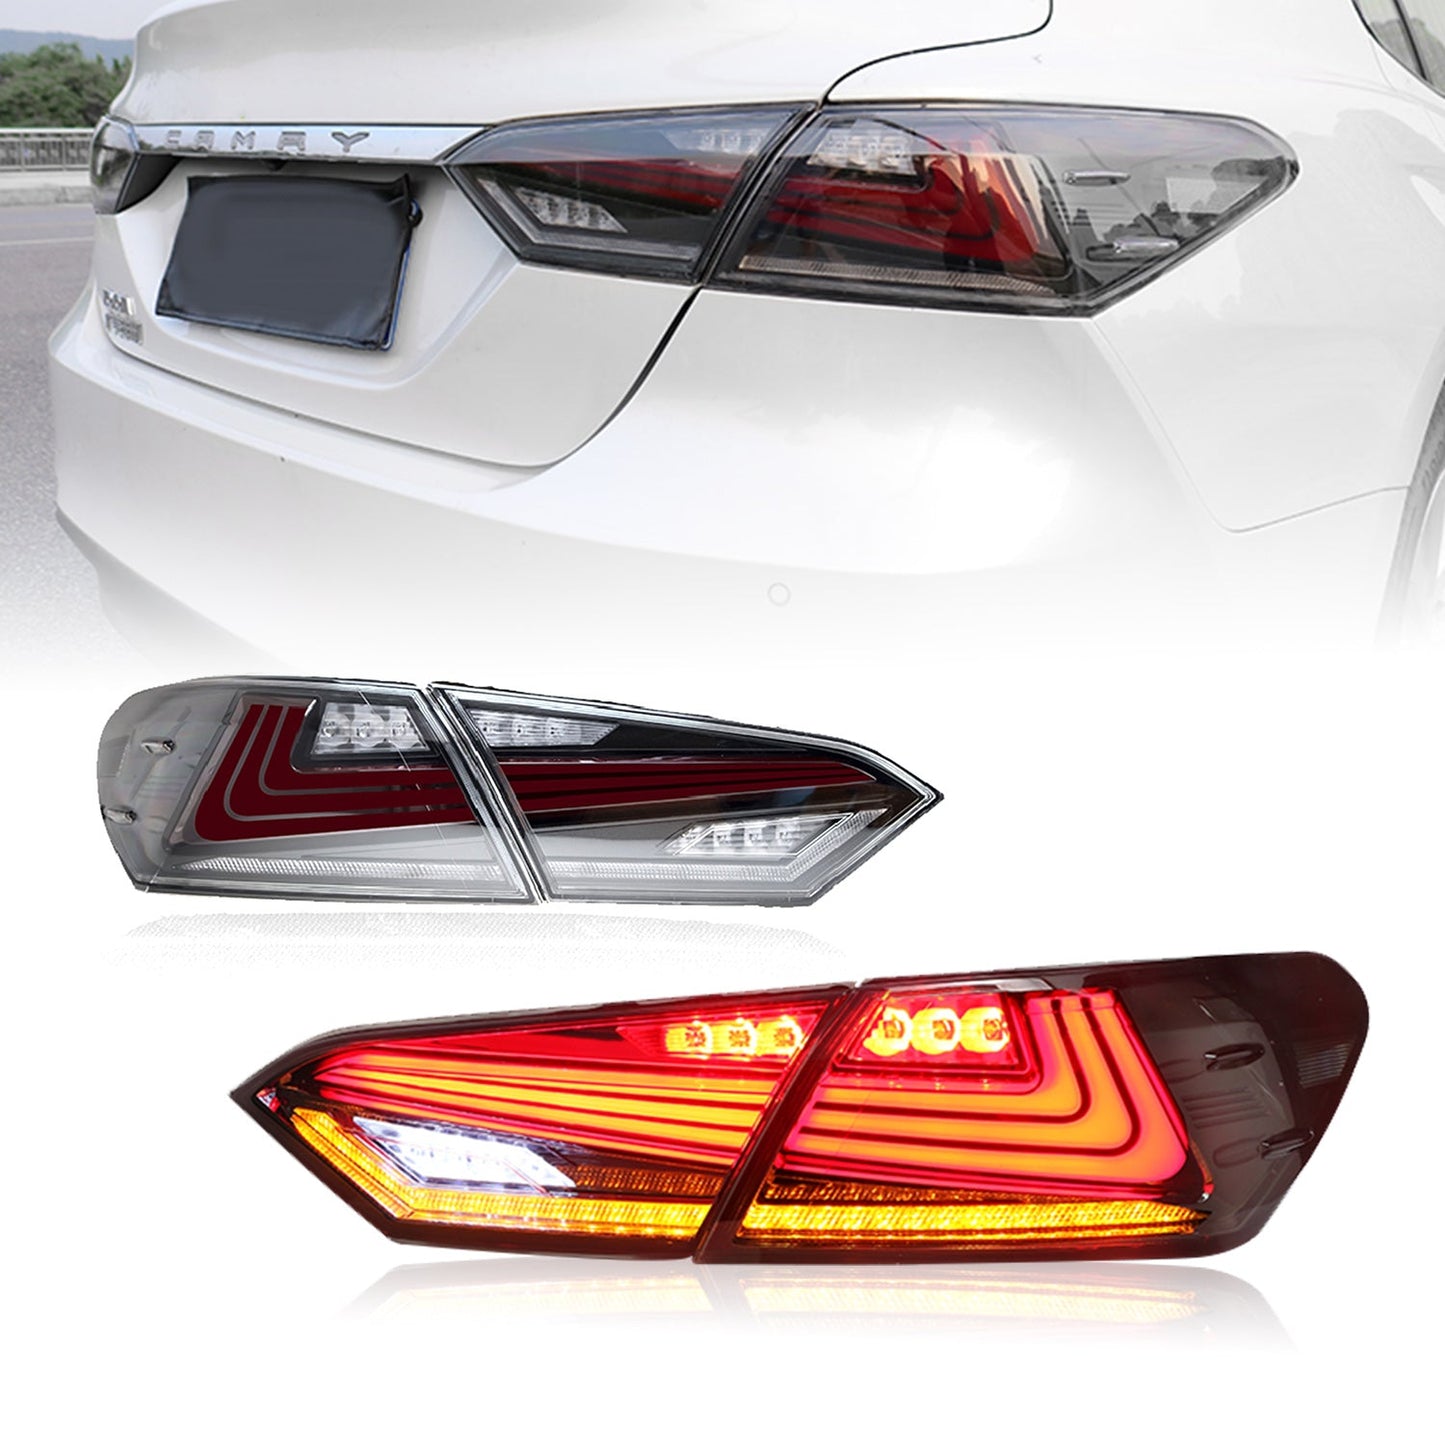 Taillights Fit Toyota Camry 2018-2021 - HCMOTION